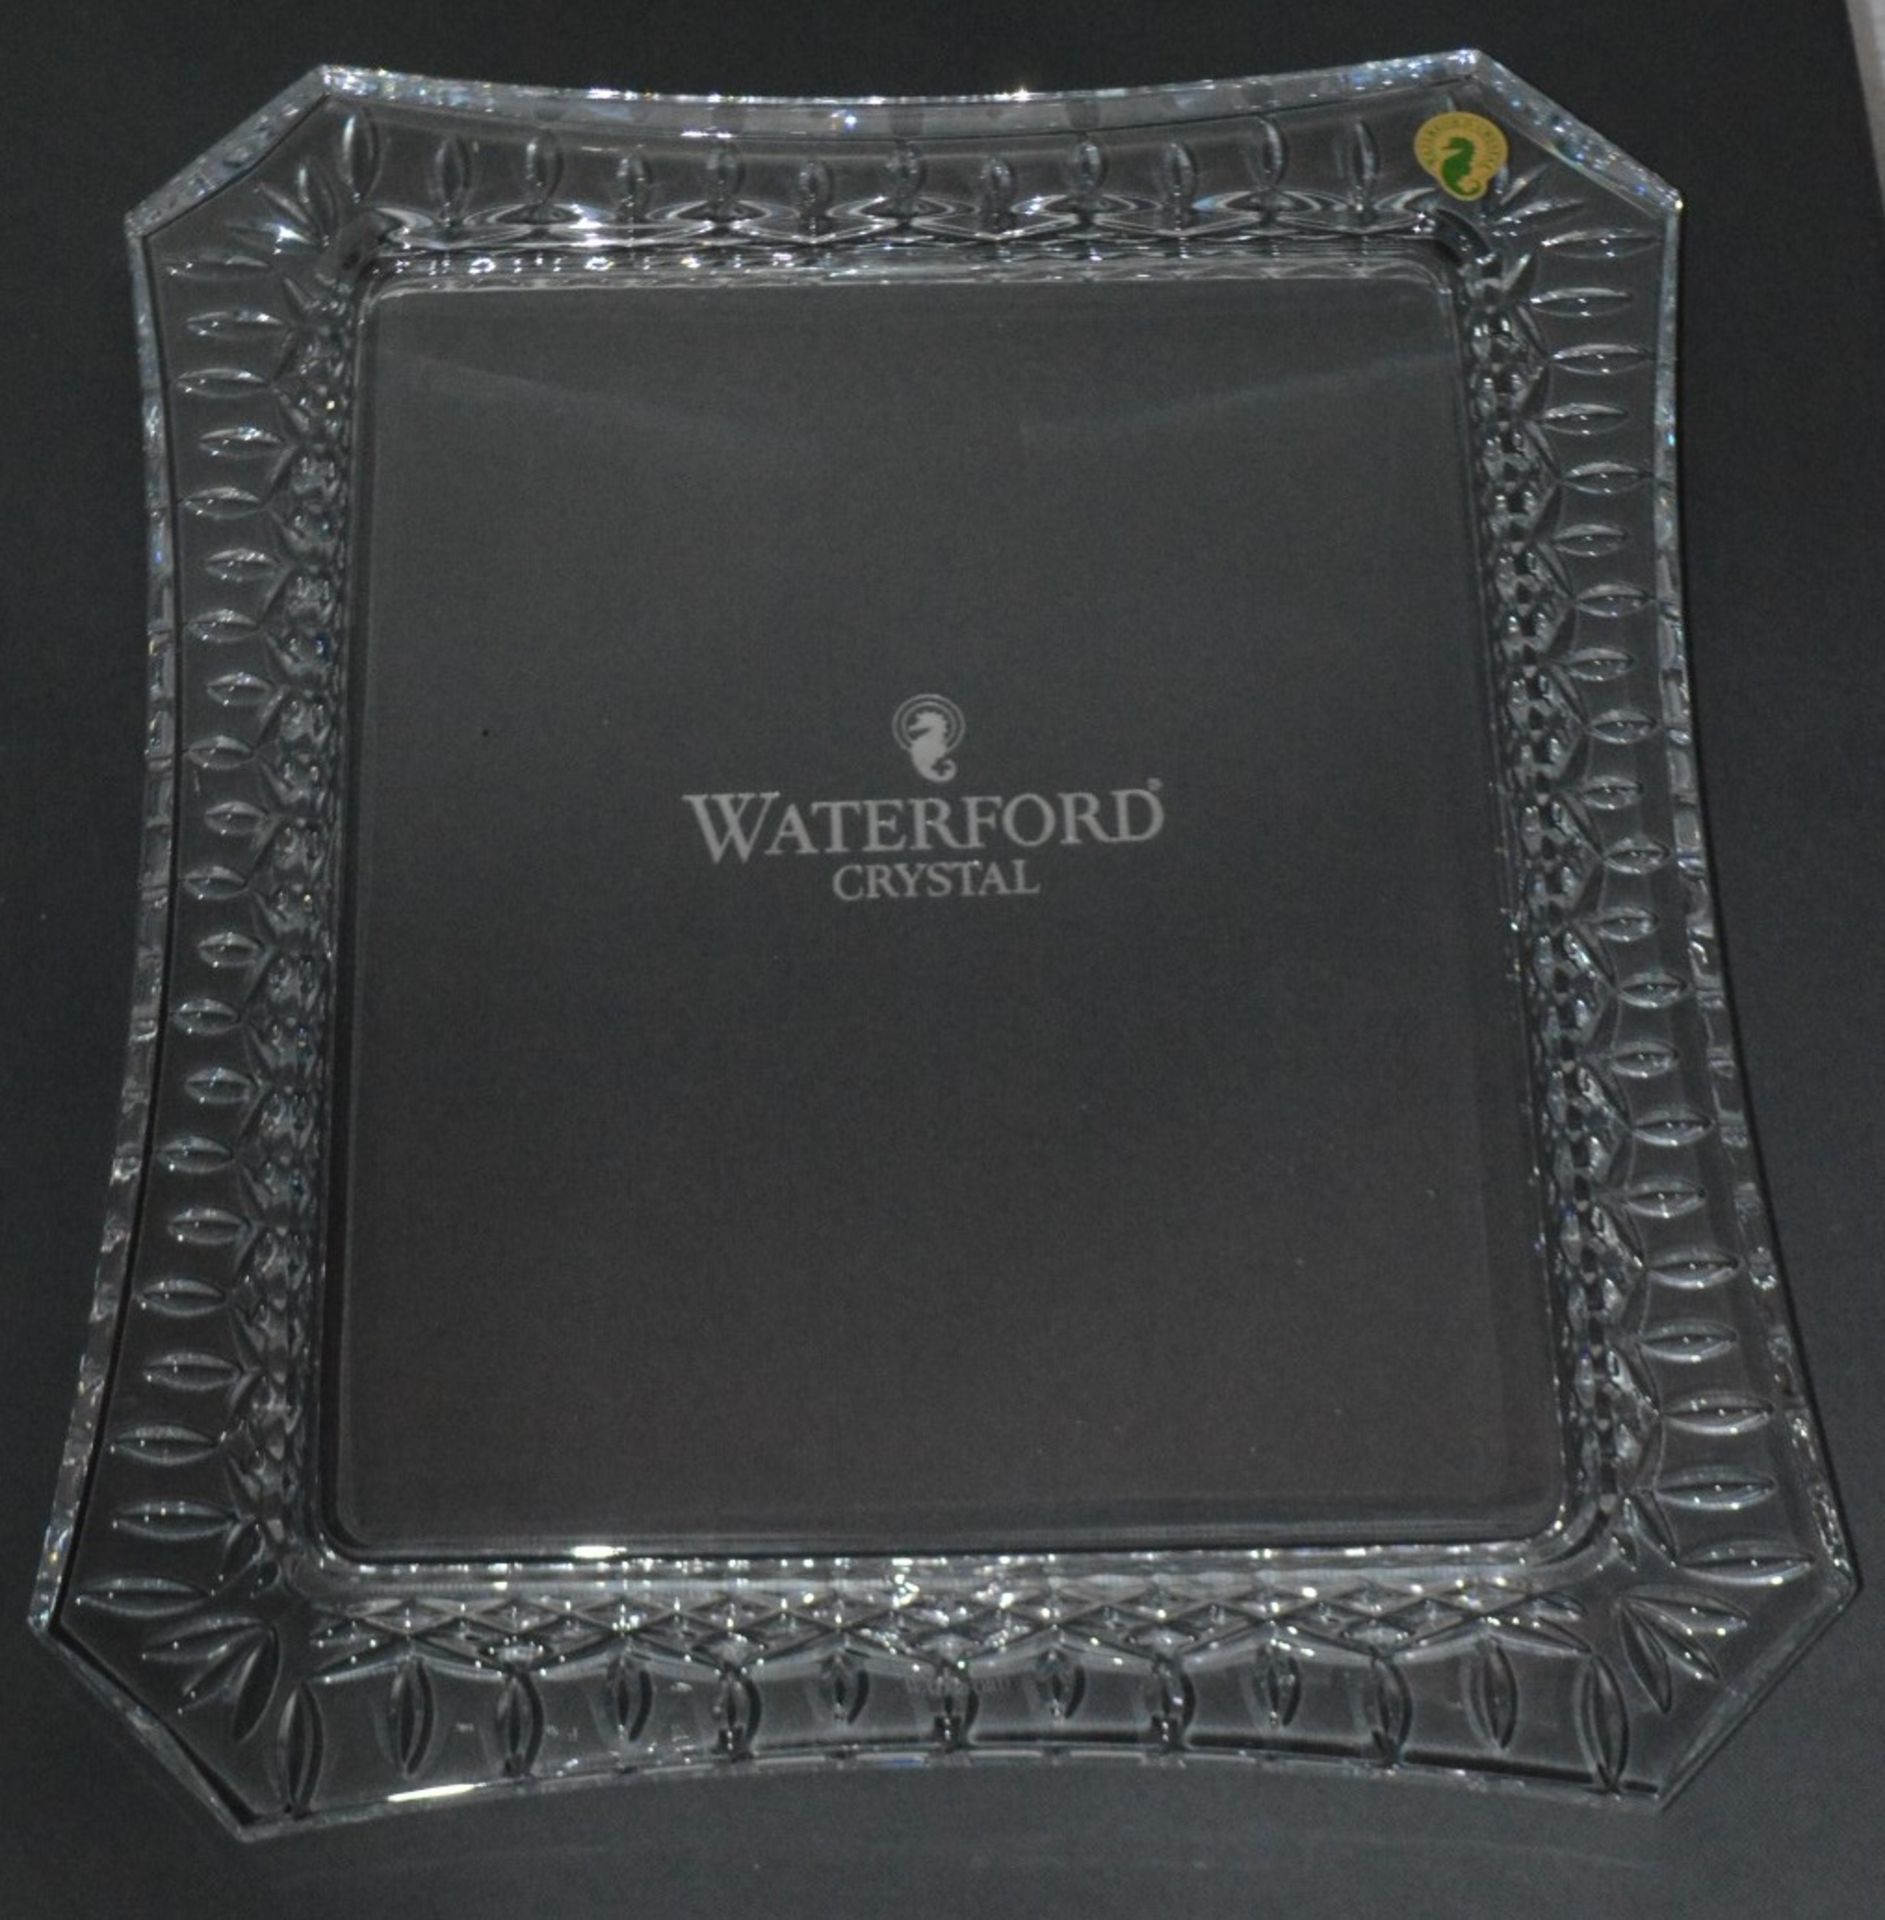 1 x Waterford 'Lismore' Crystal 8 x 10 Large Photo Frame - Original RRP £160.00 - Read Description - Image 2 of 7